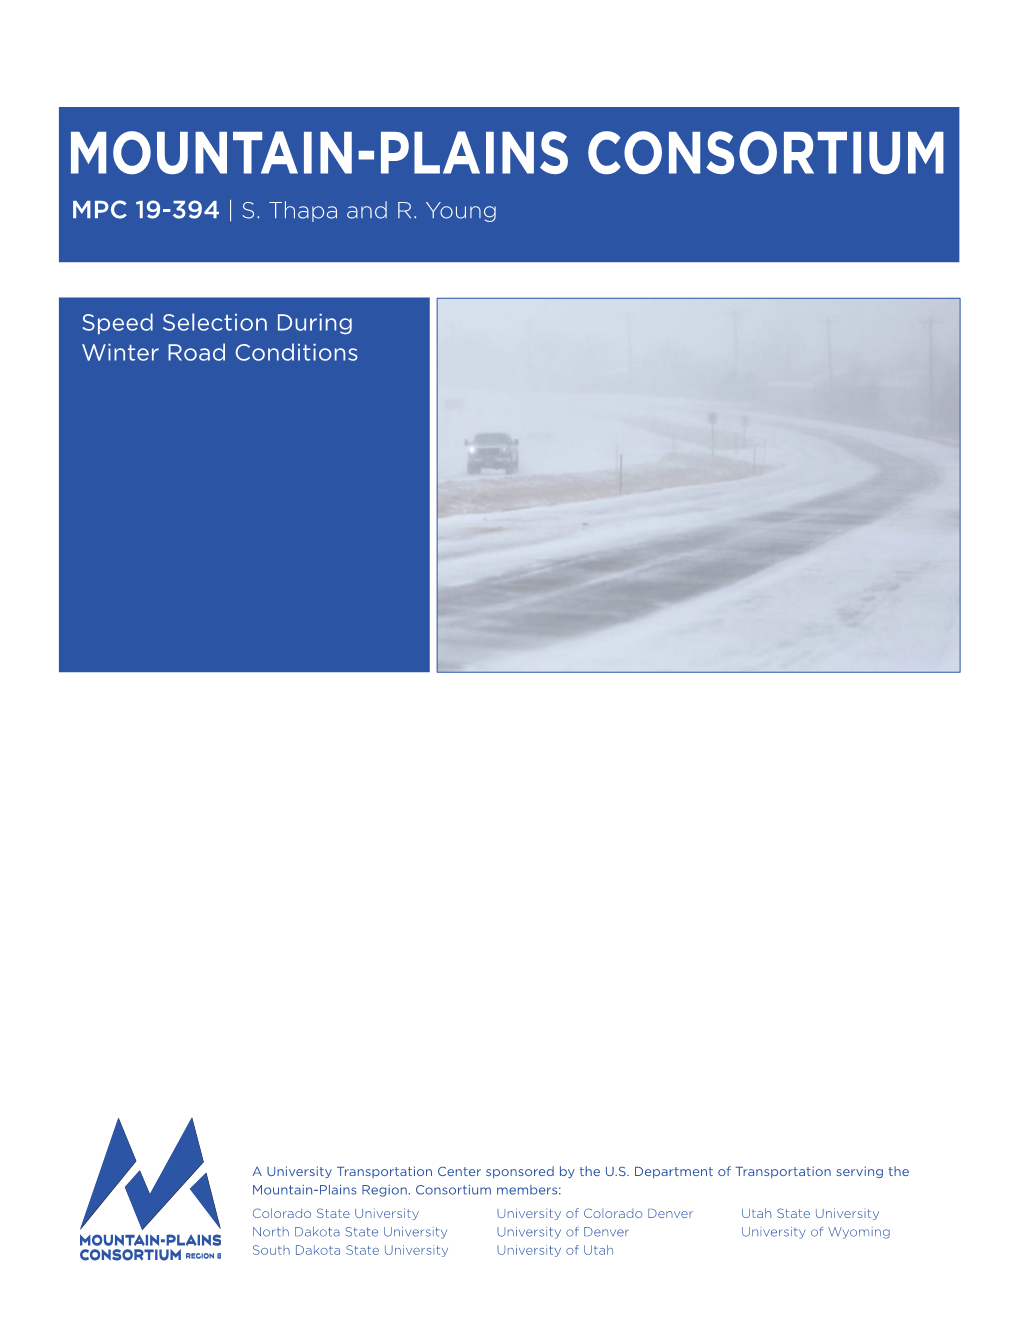 Speed Selection During Winter Road Conditions (MPC-19-394)